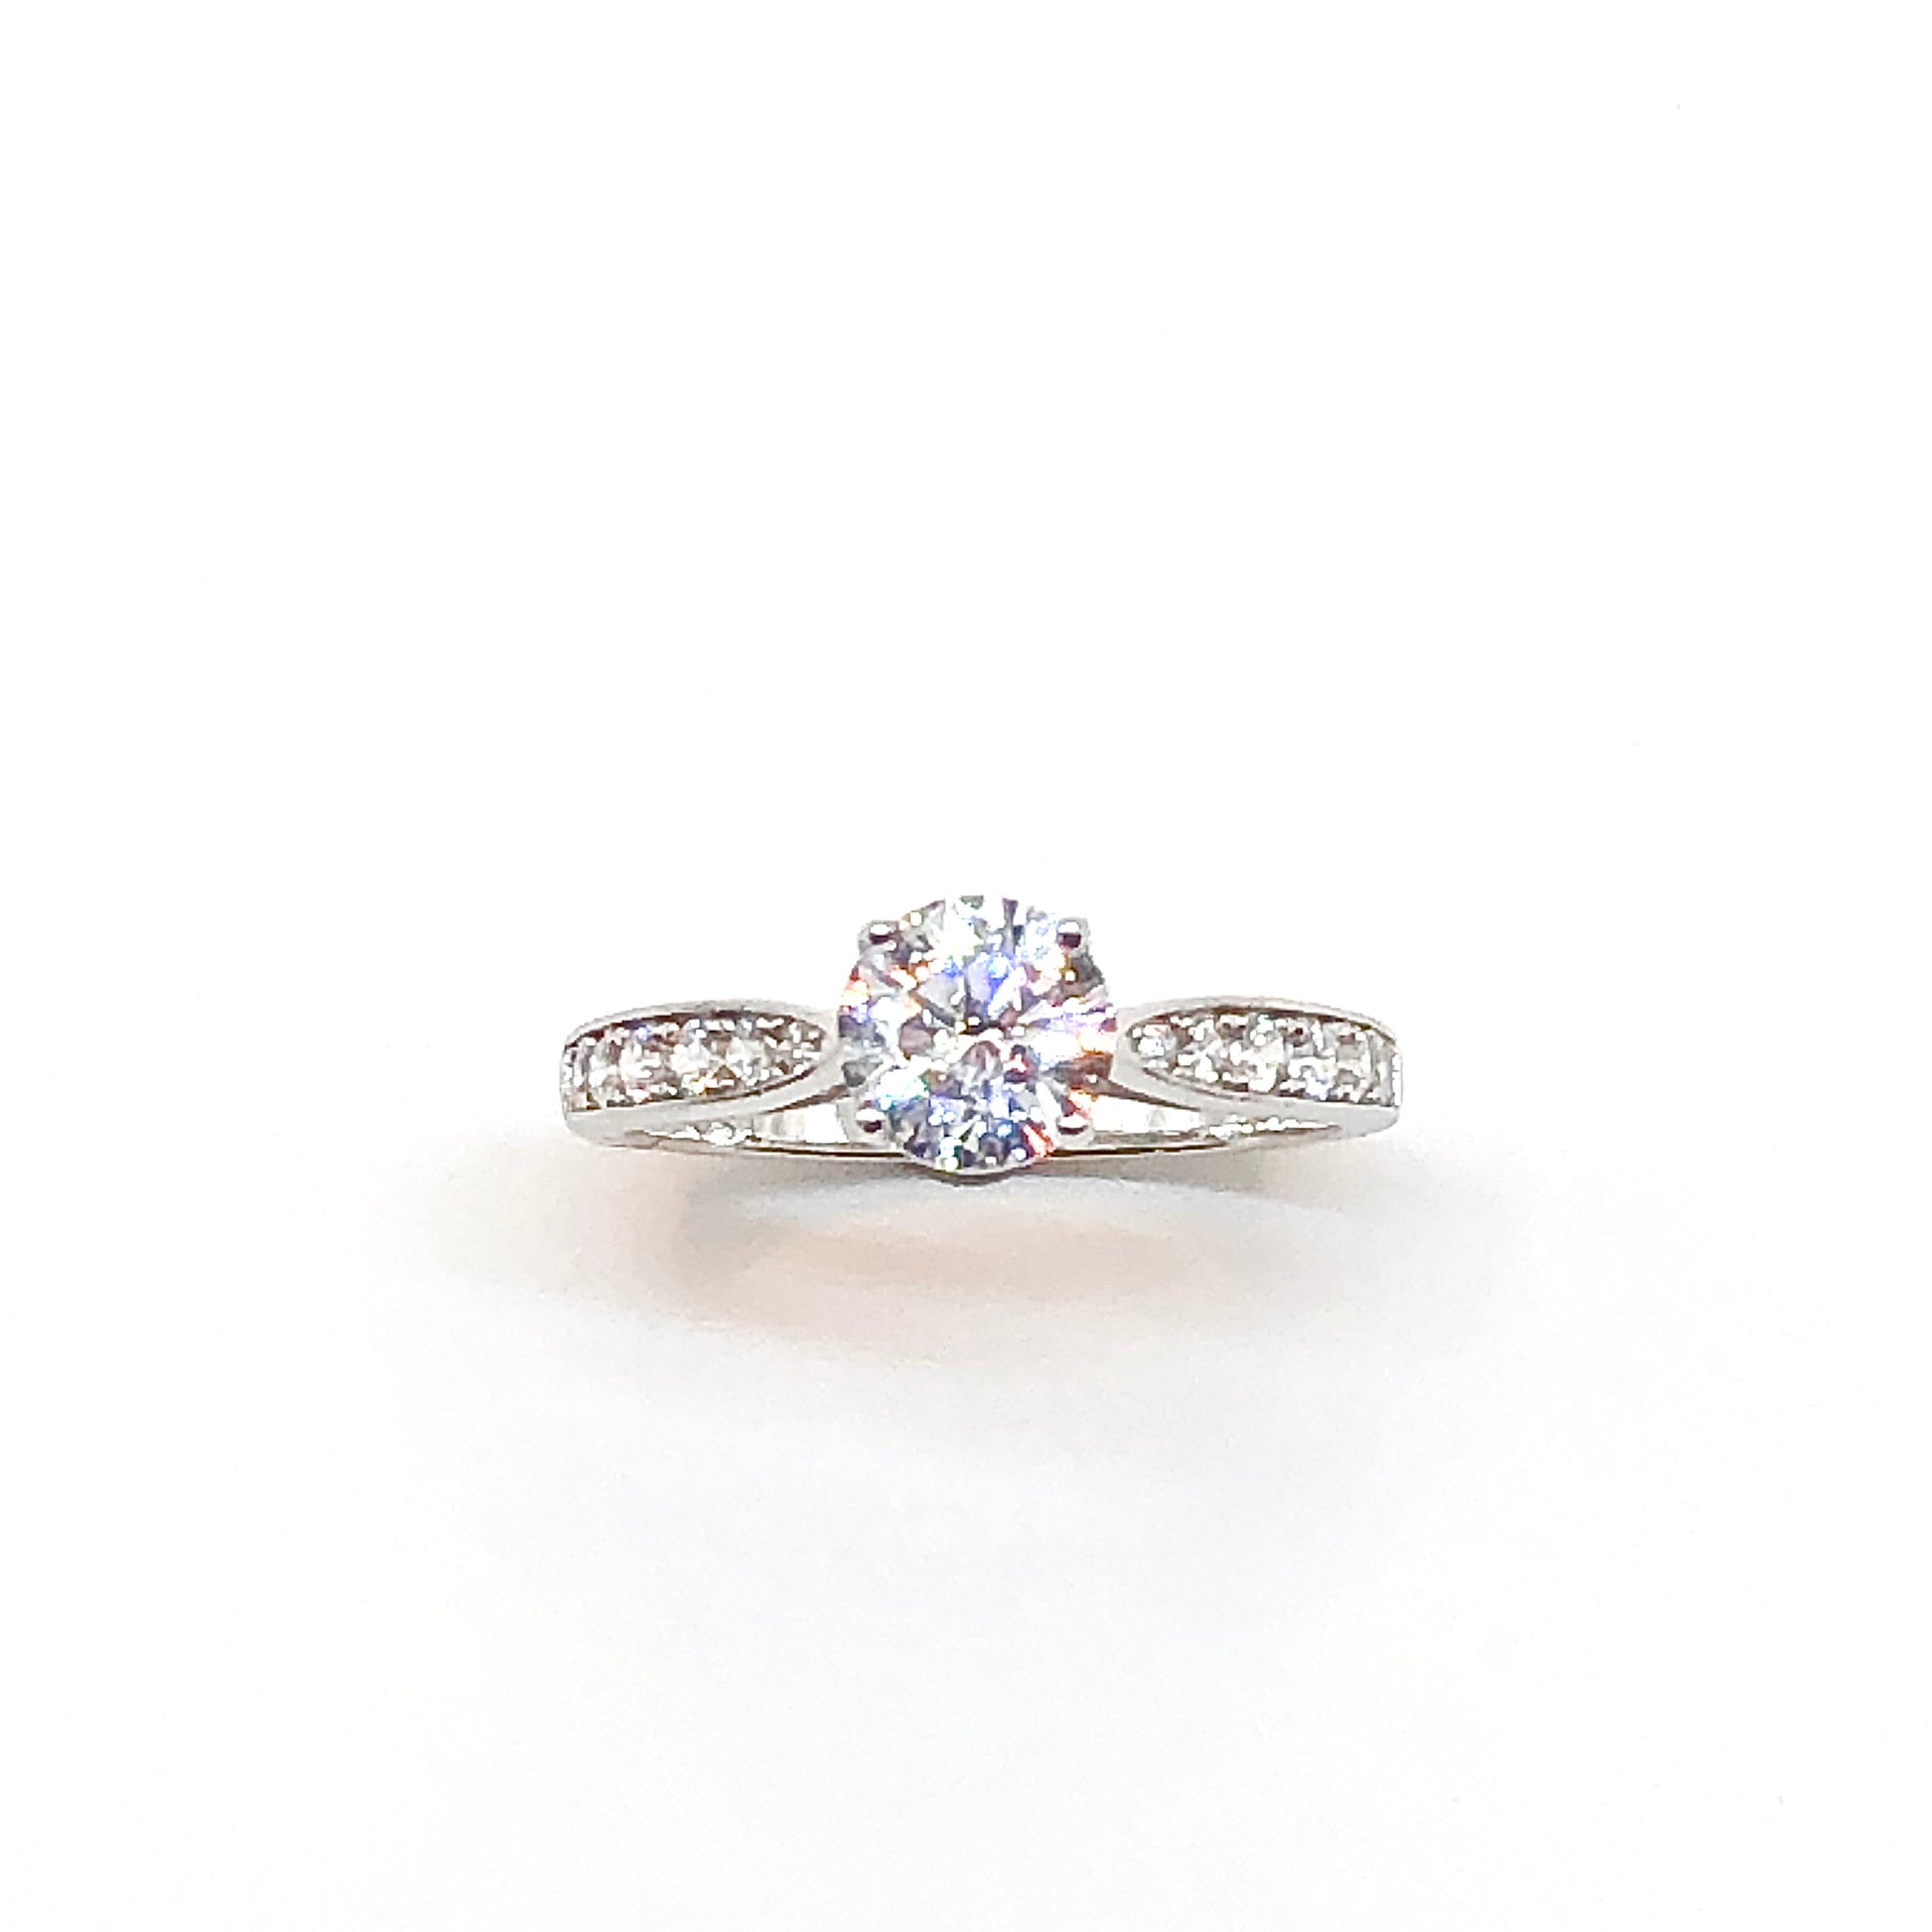  Silver Ring | Cocktail Ring | Womens 925 Sterling Stunning Sparkly Solitaire Engagement Ring